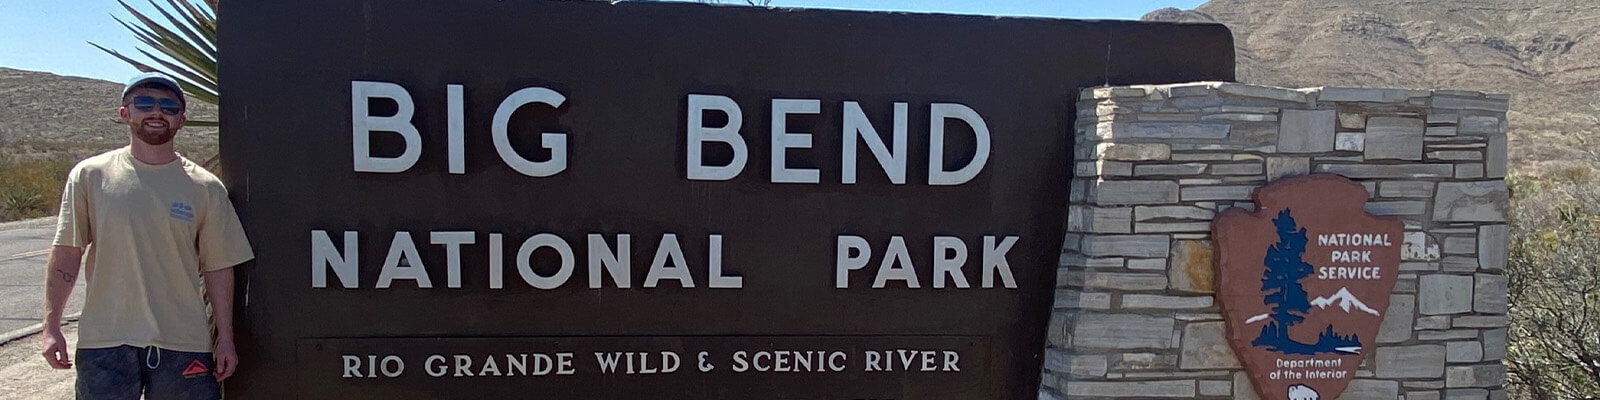 David Magee stood in front of a sign for Big Bend National Park